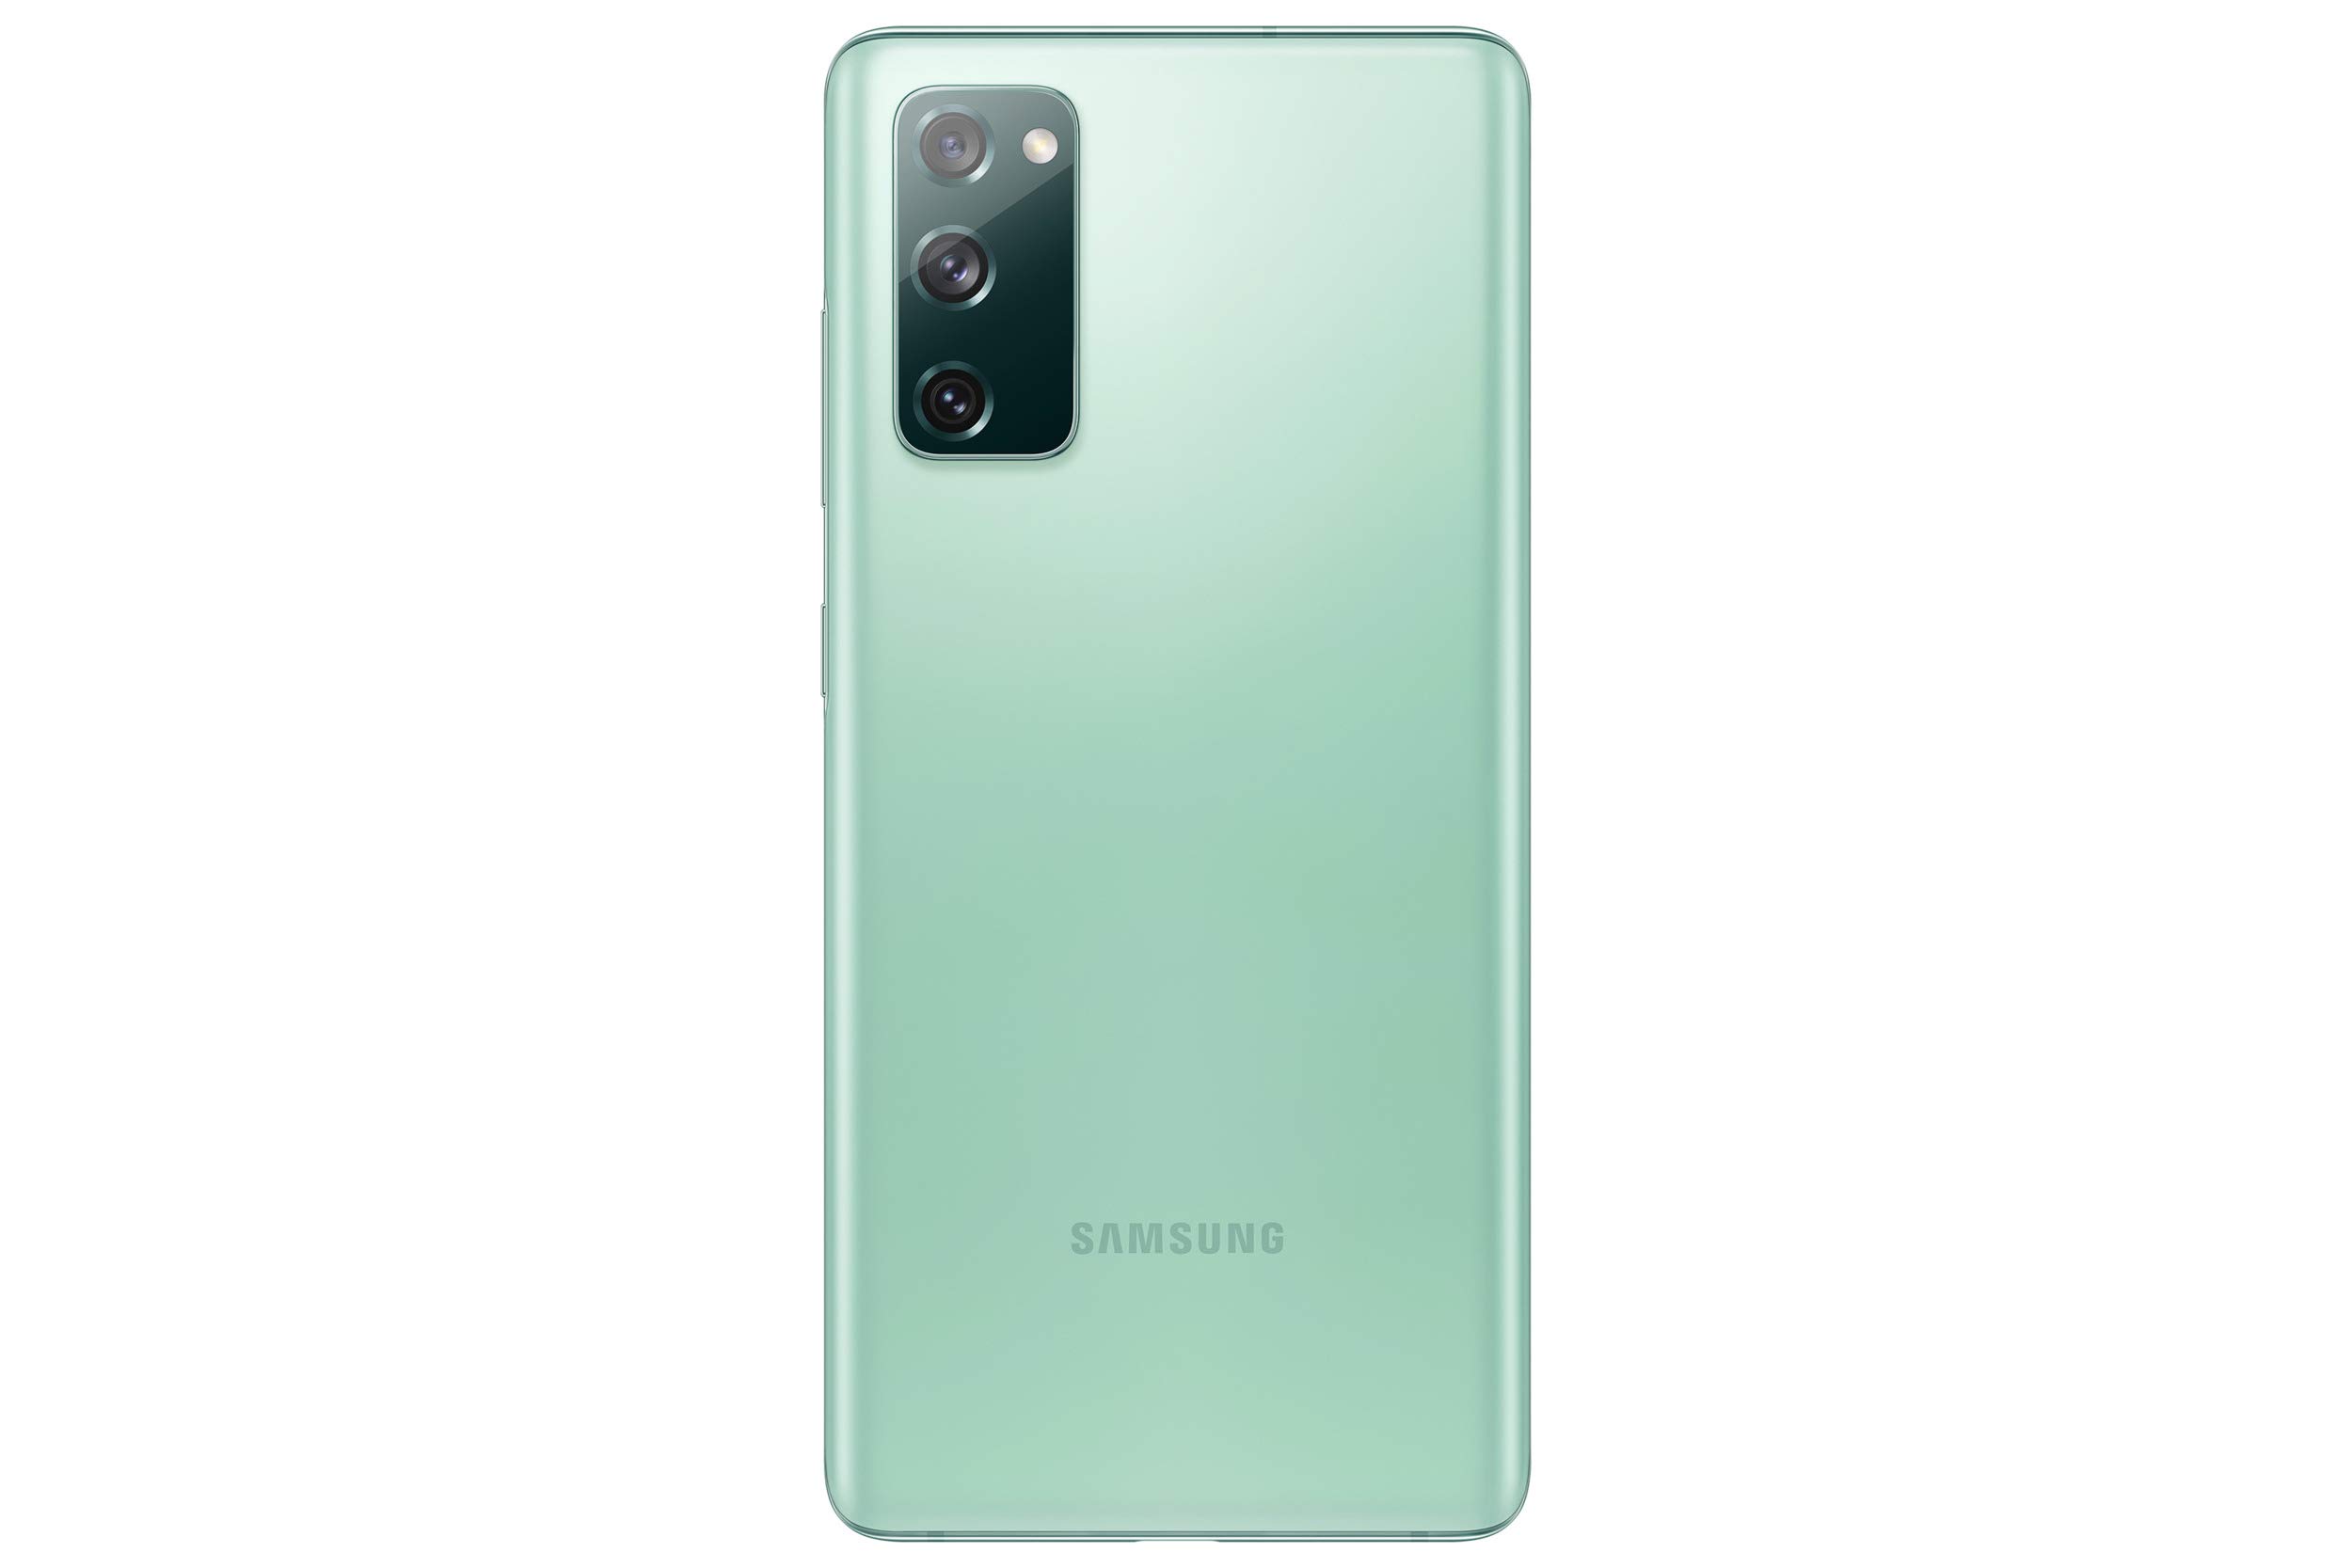 SAMSUNG Galaxy S20 FE 5G Cell Phone, Factory Unlocked Android Smartphone, 128GB, Pro Grade Camera, 30X Space Zoom, Night Mode, US Version, Cloud Mint Green